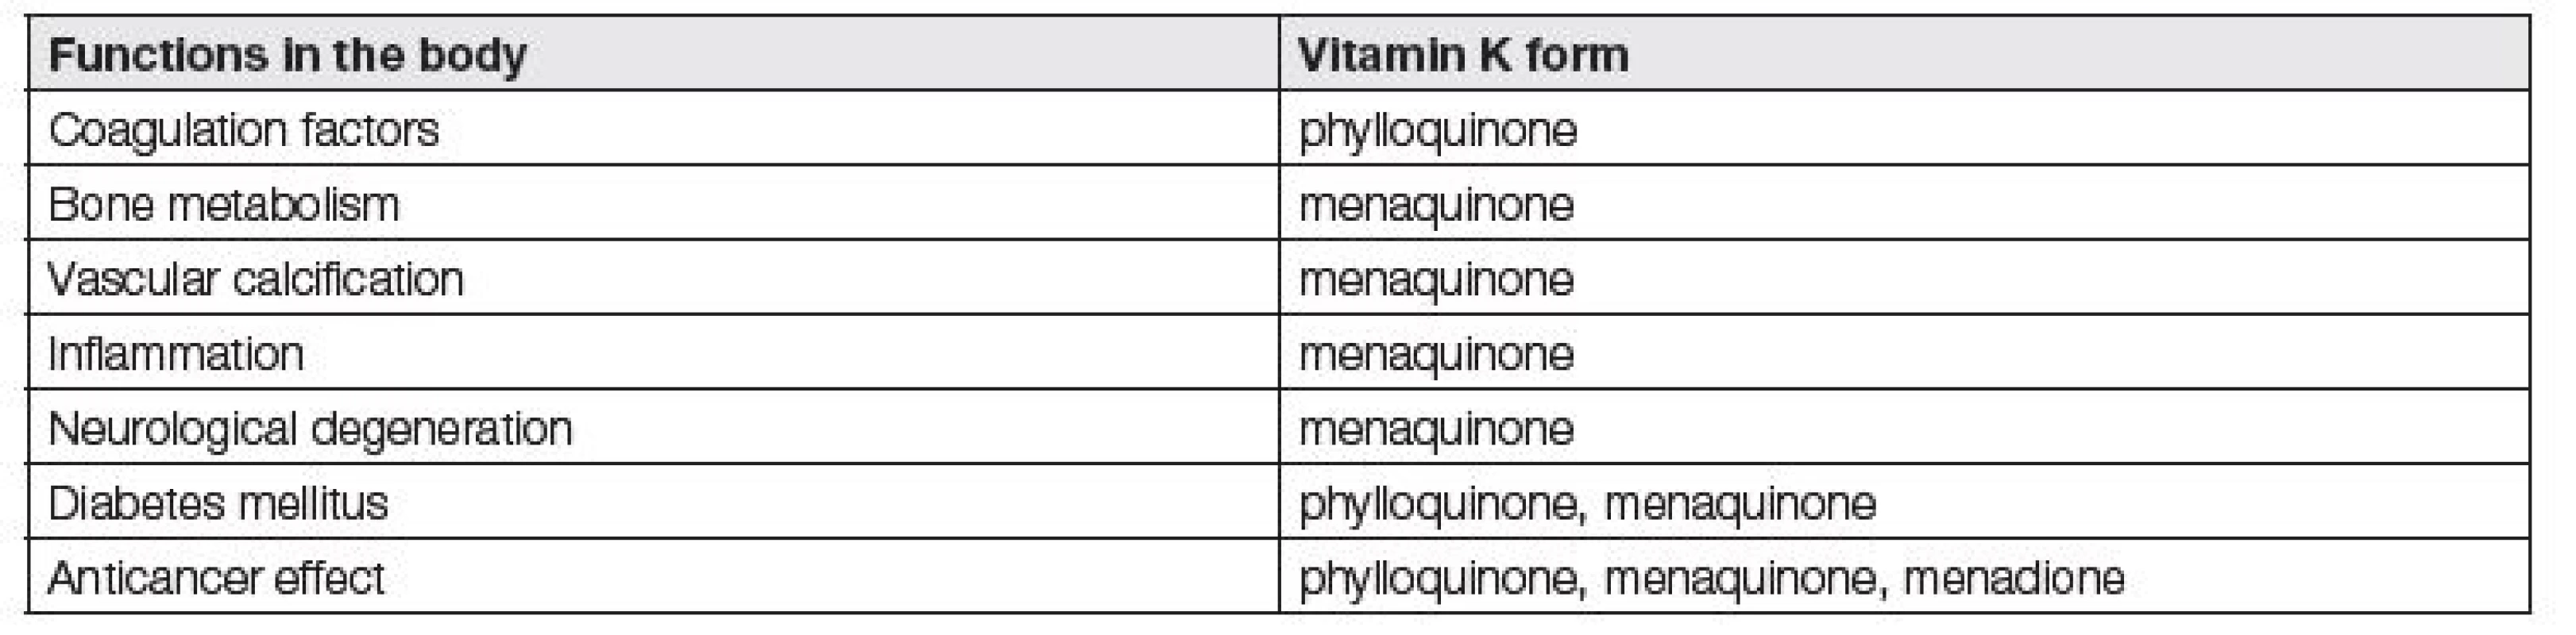 Overview of vitamin K functions in the body